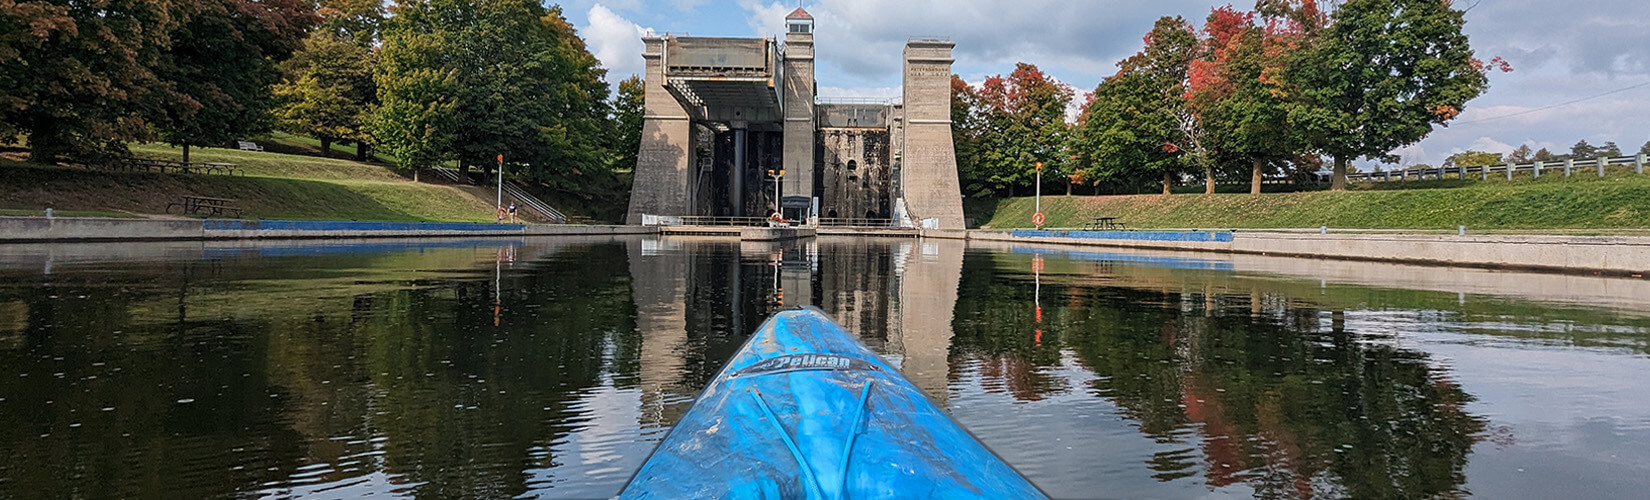 Peterborough Kayaking Guide: 9 Amazing Spots to Paddle in The Kawarthas :: I've Been Bit! Travel Blog